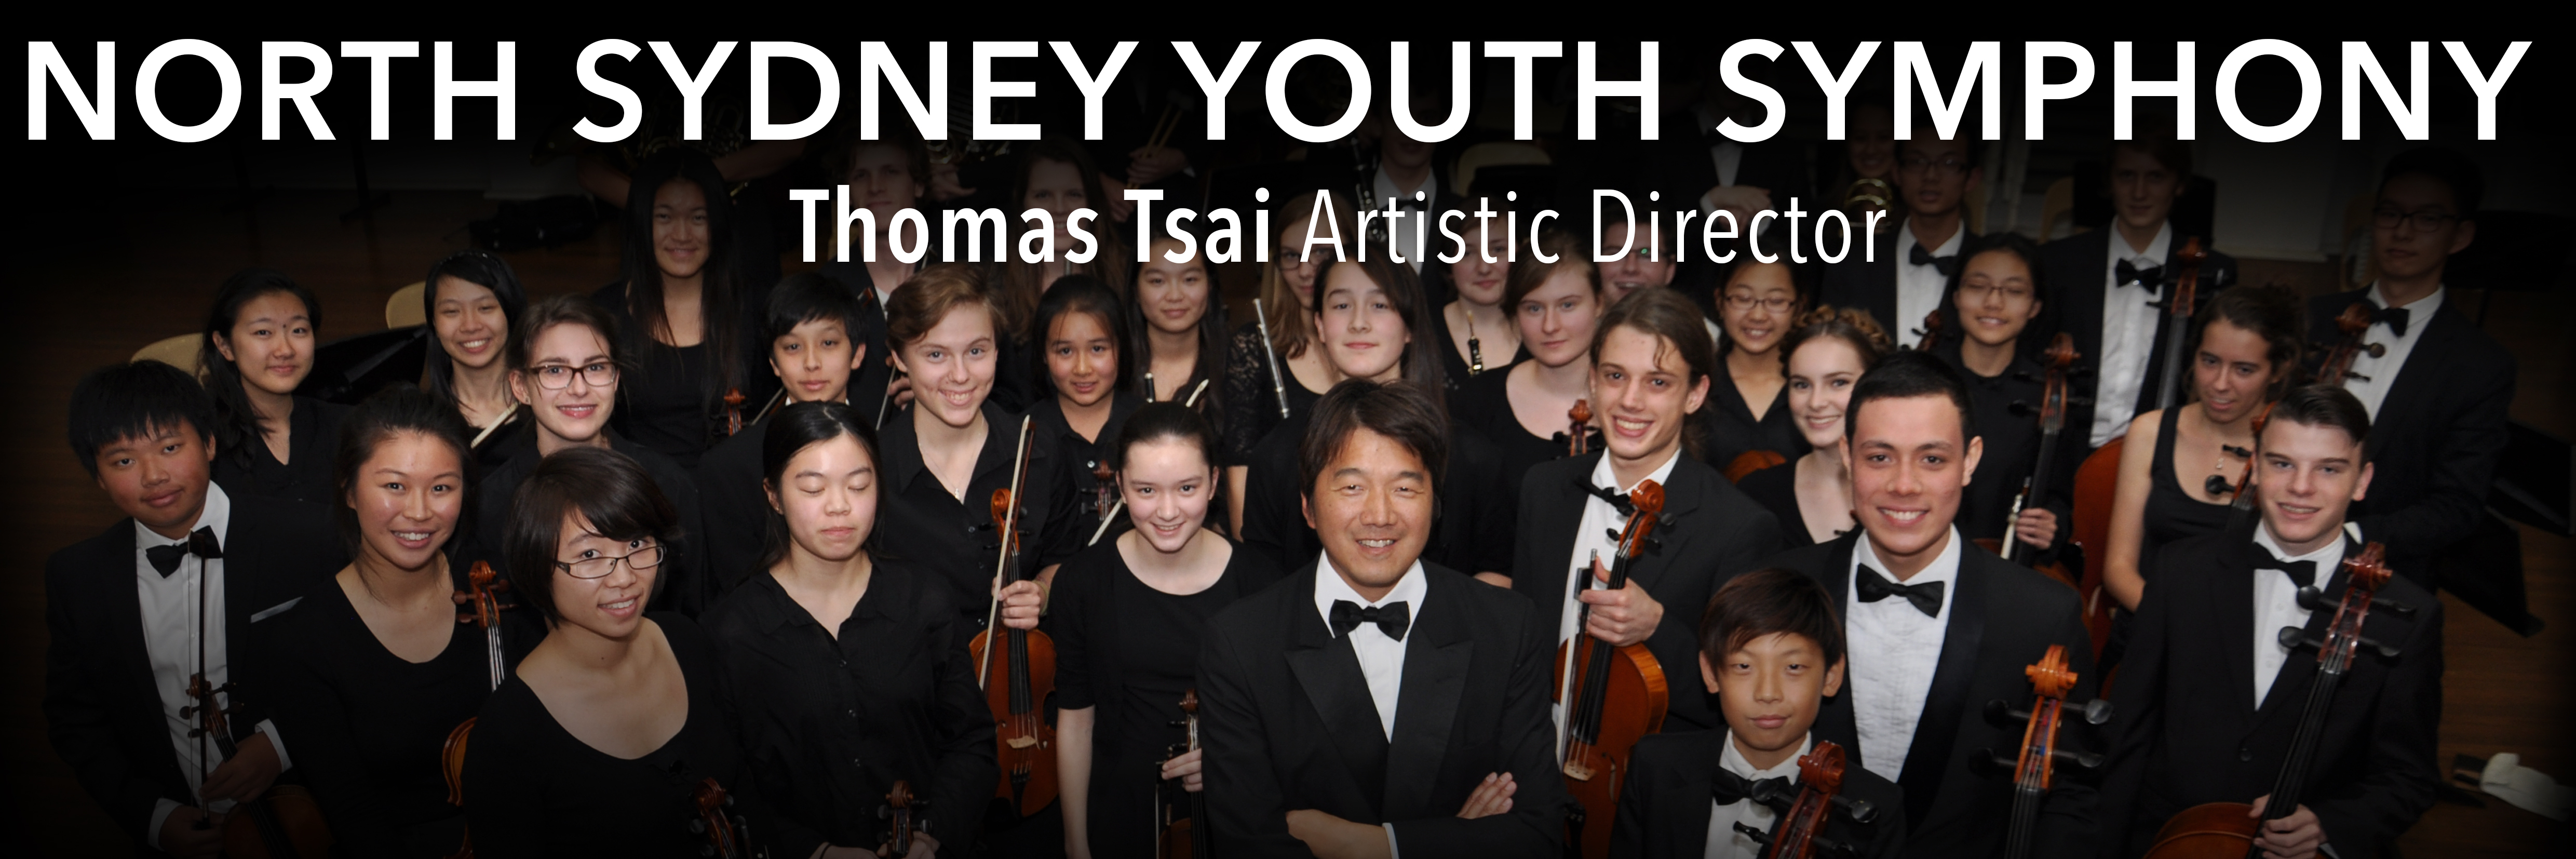 North Sydney Youth Symphony Performs